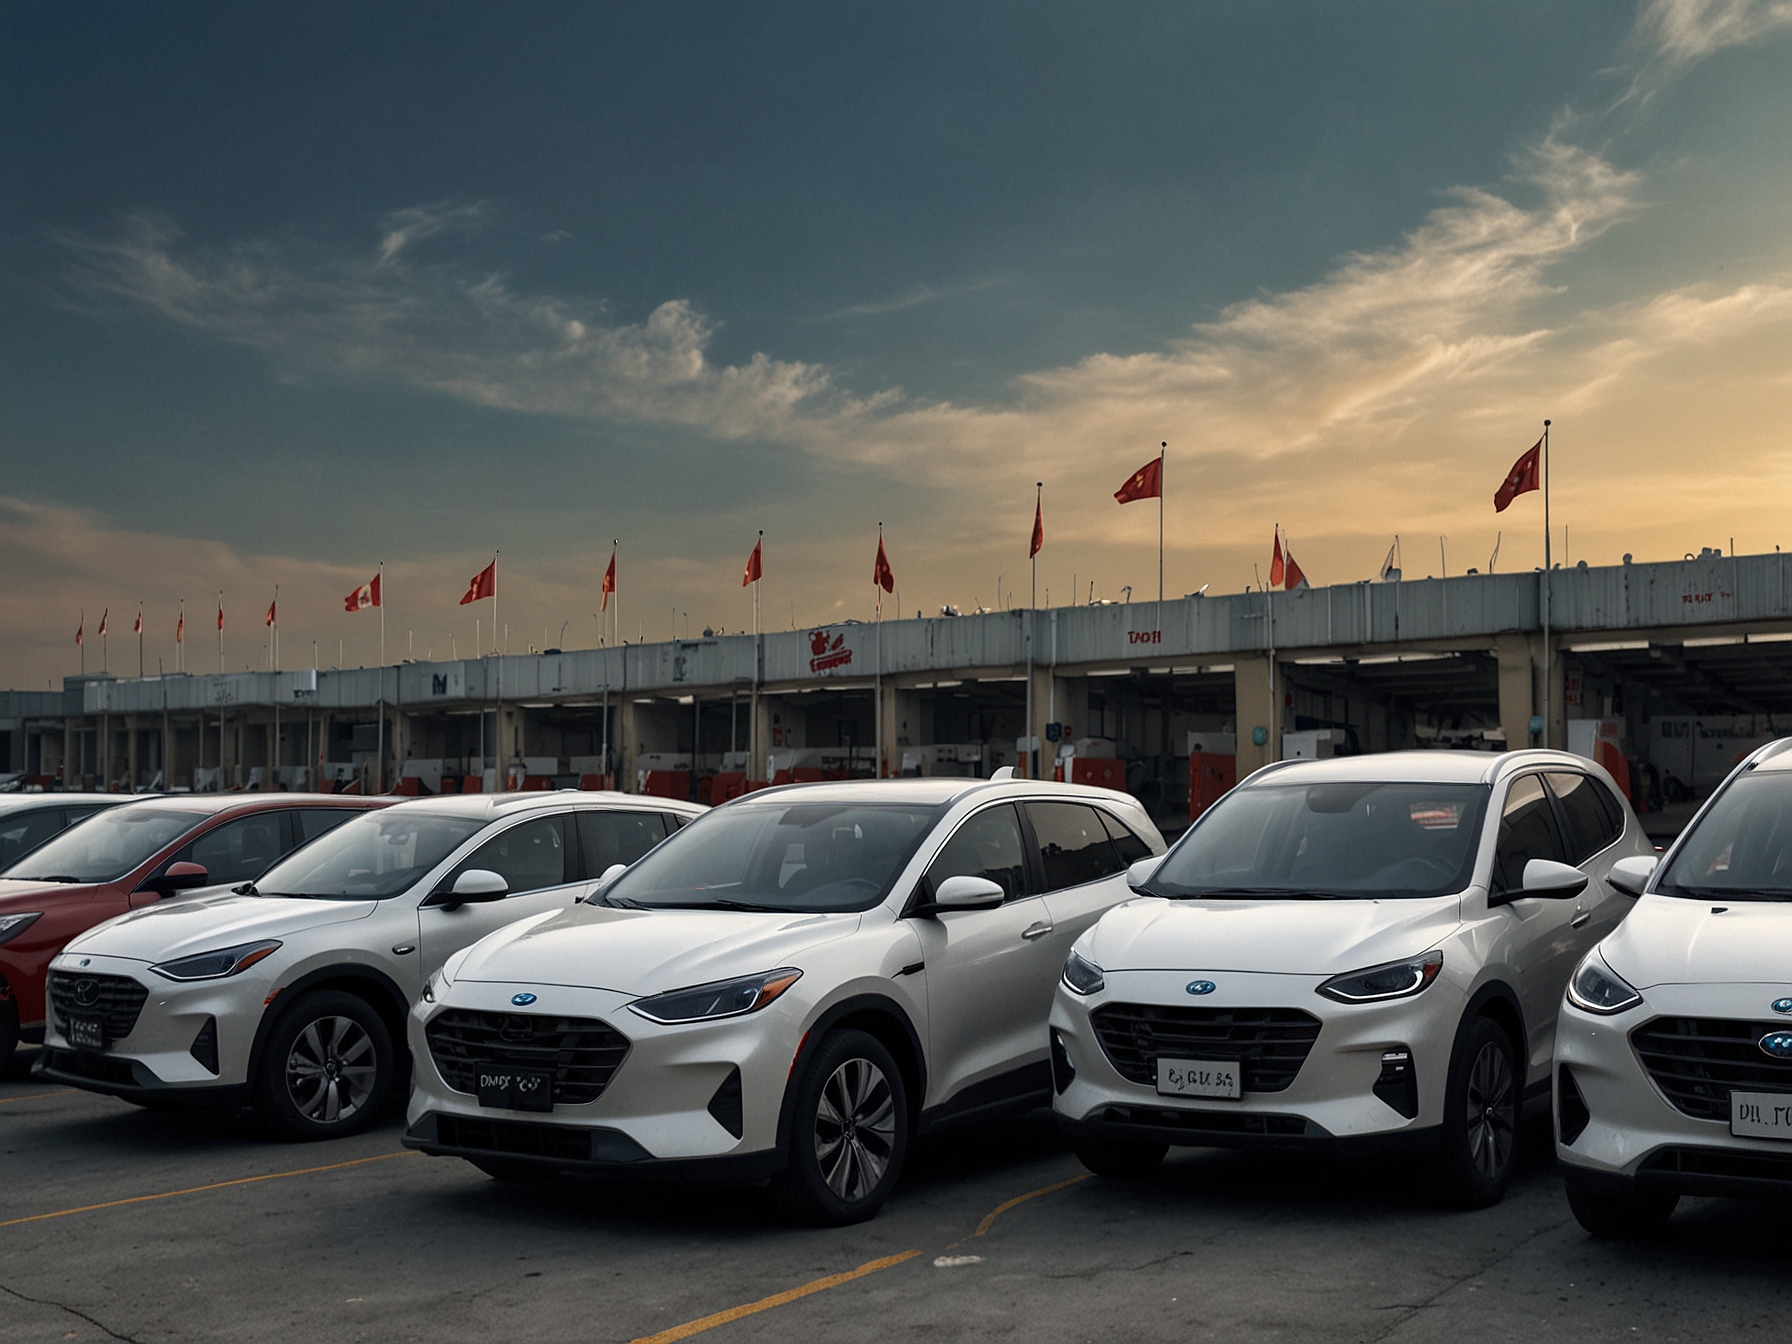 Chinese electric vehicles lined up for export. The image highlights the influx of low-cost EVs into the Canadian market, which Doug Ford argues threatens local automotive jobs.